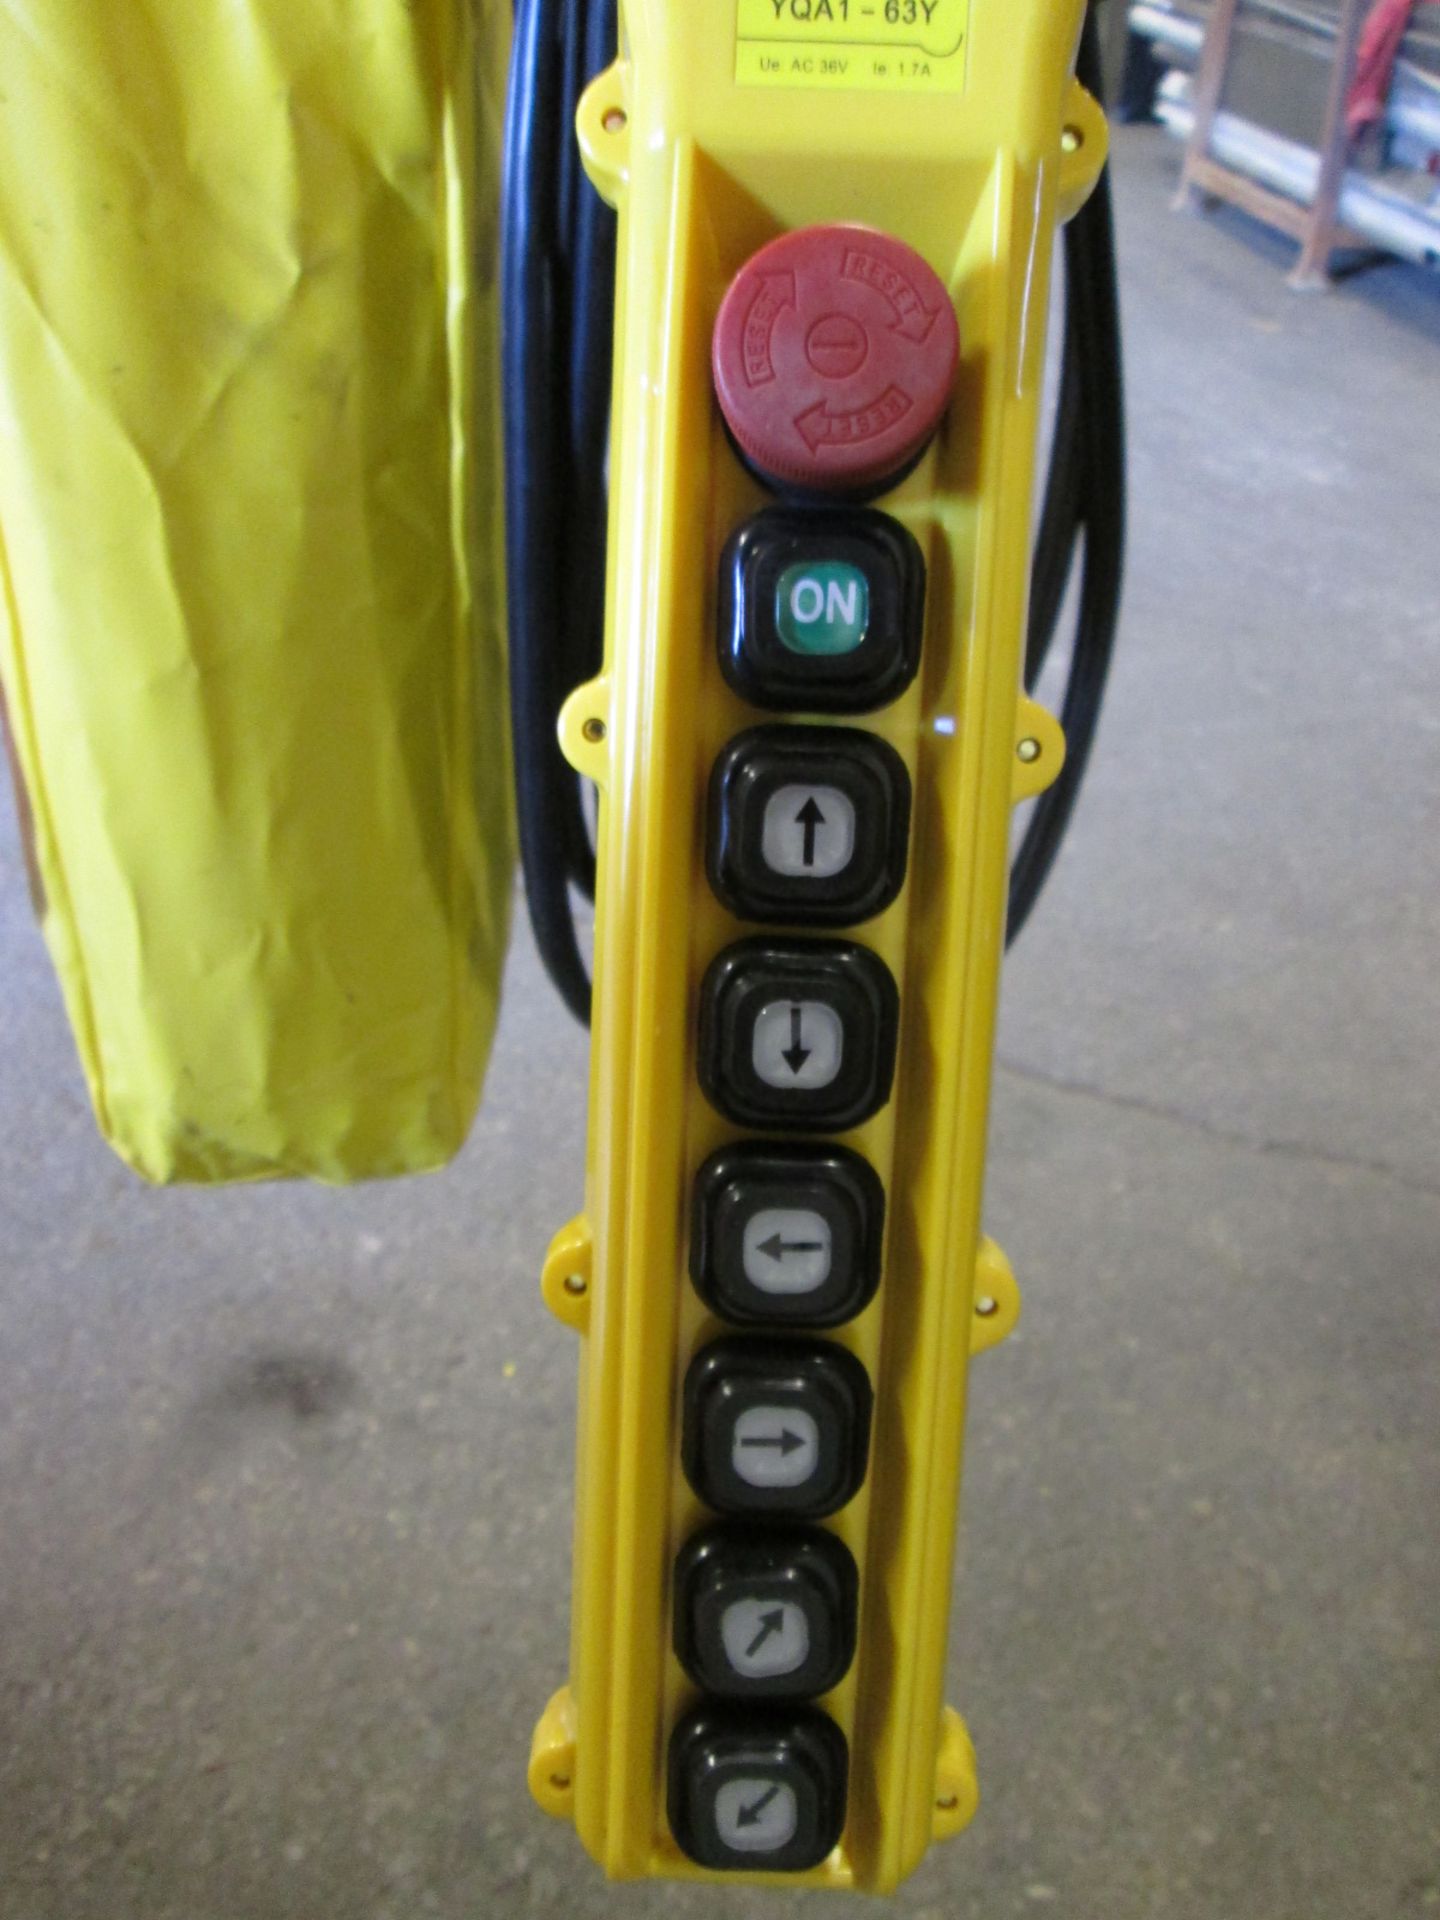 RW 3 Ton Electric chain hoist with power trolley and 8 button pendant controller - 220V - 20 foot - Image 2 of 2